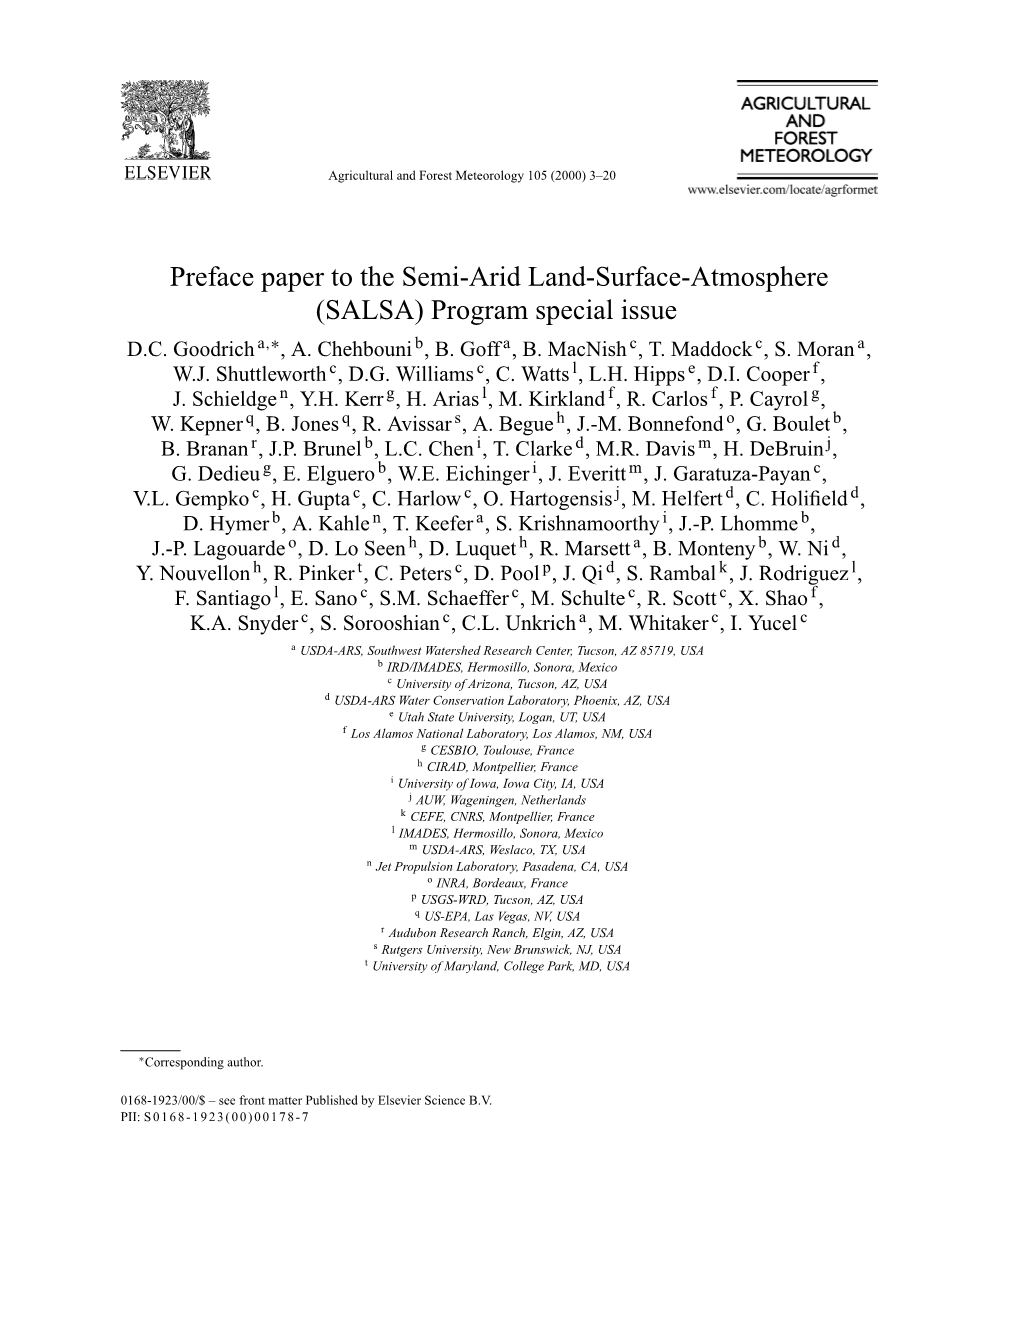 Preface Paper to the Semi-Arid Land-Surface-Atmosphere (SALSA) Program Special Issue D.C